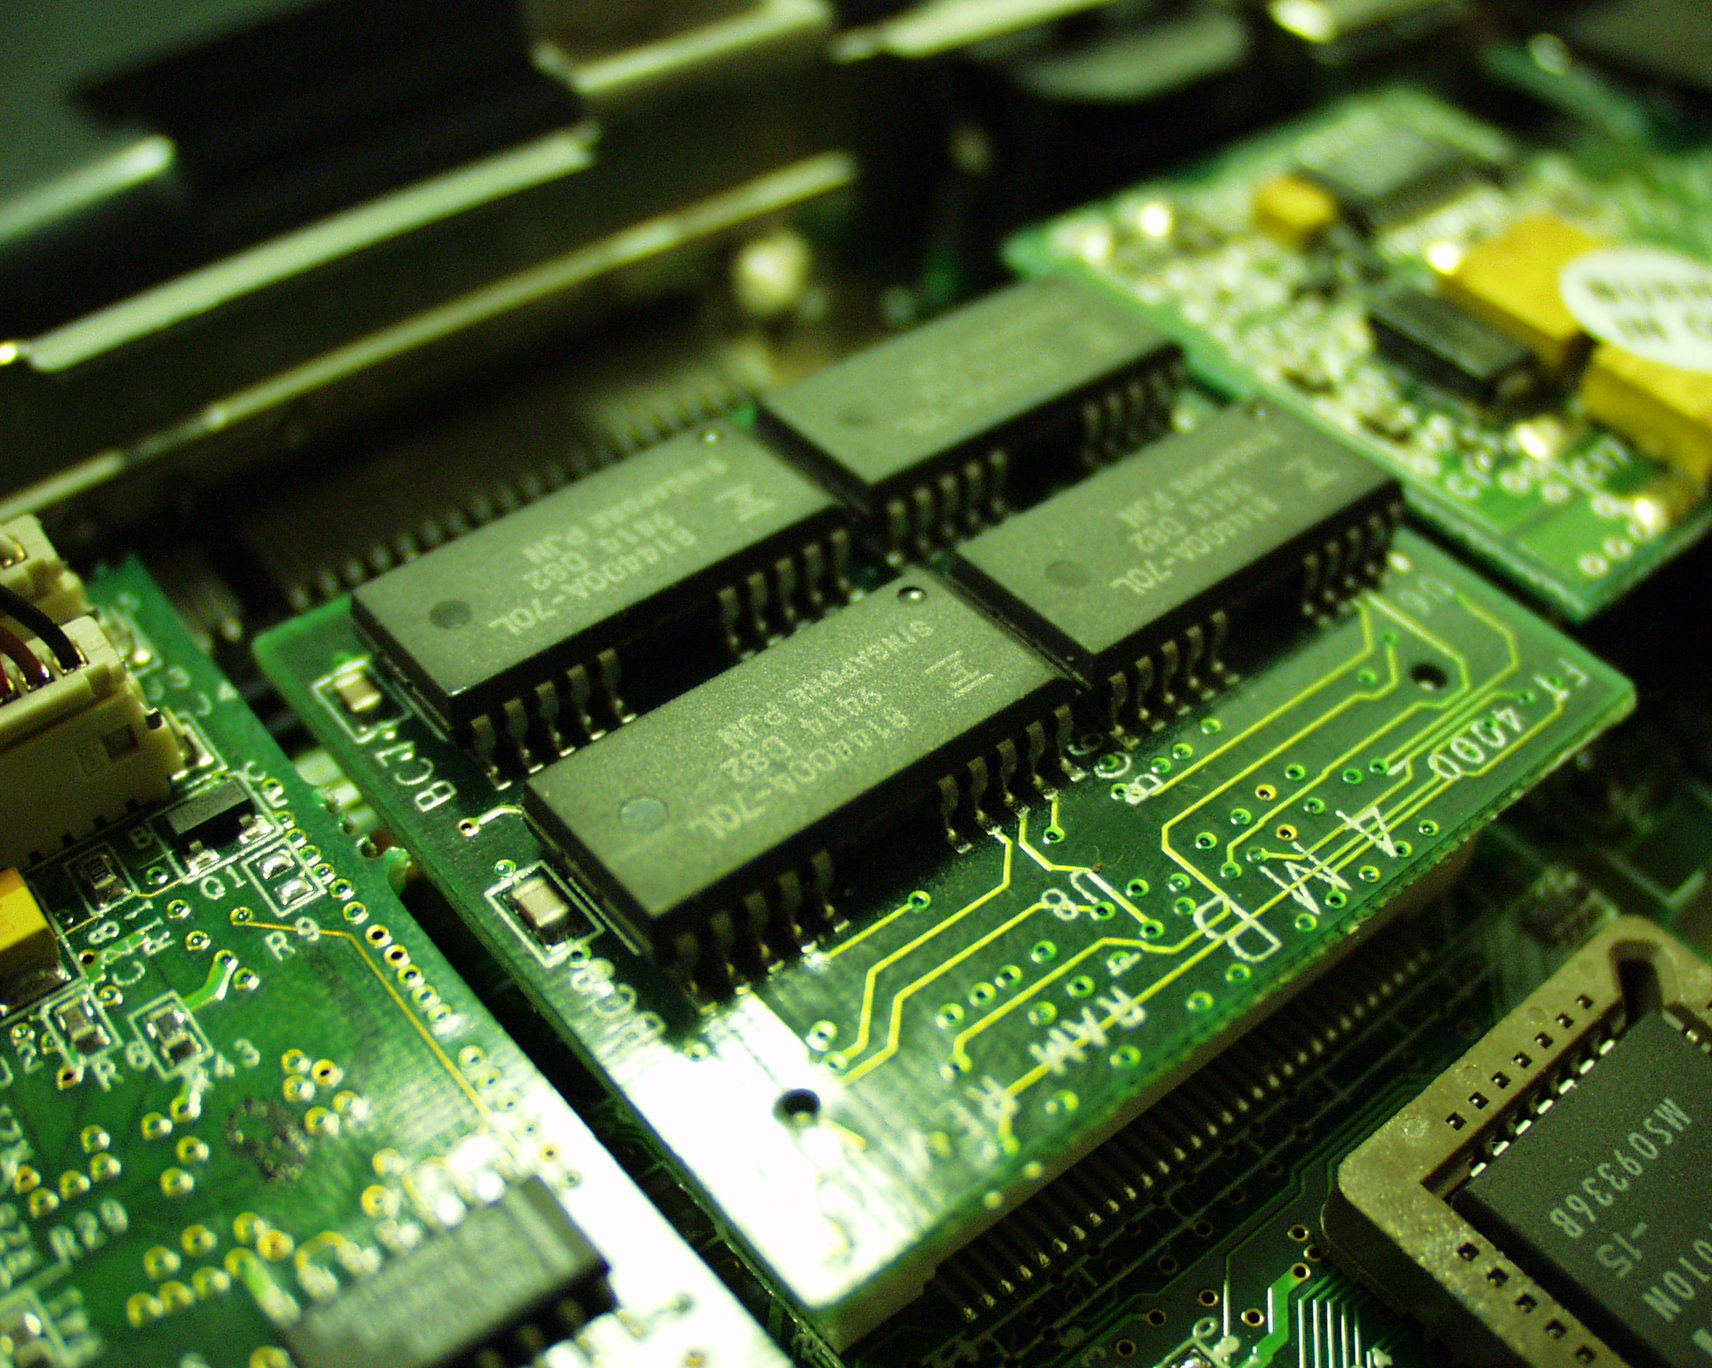 a close up image of many components on top of a computer board